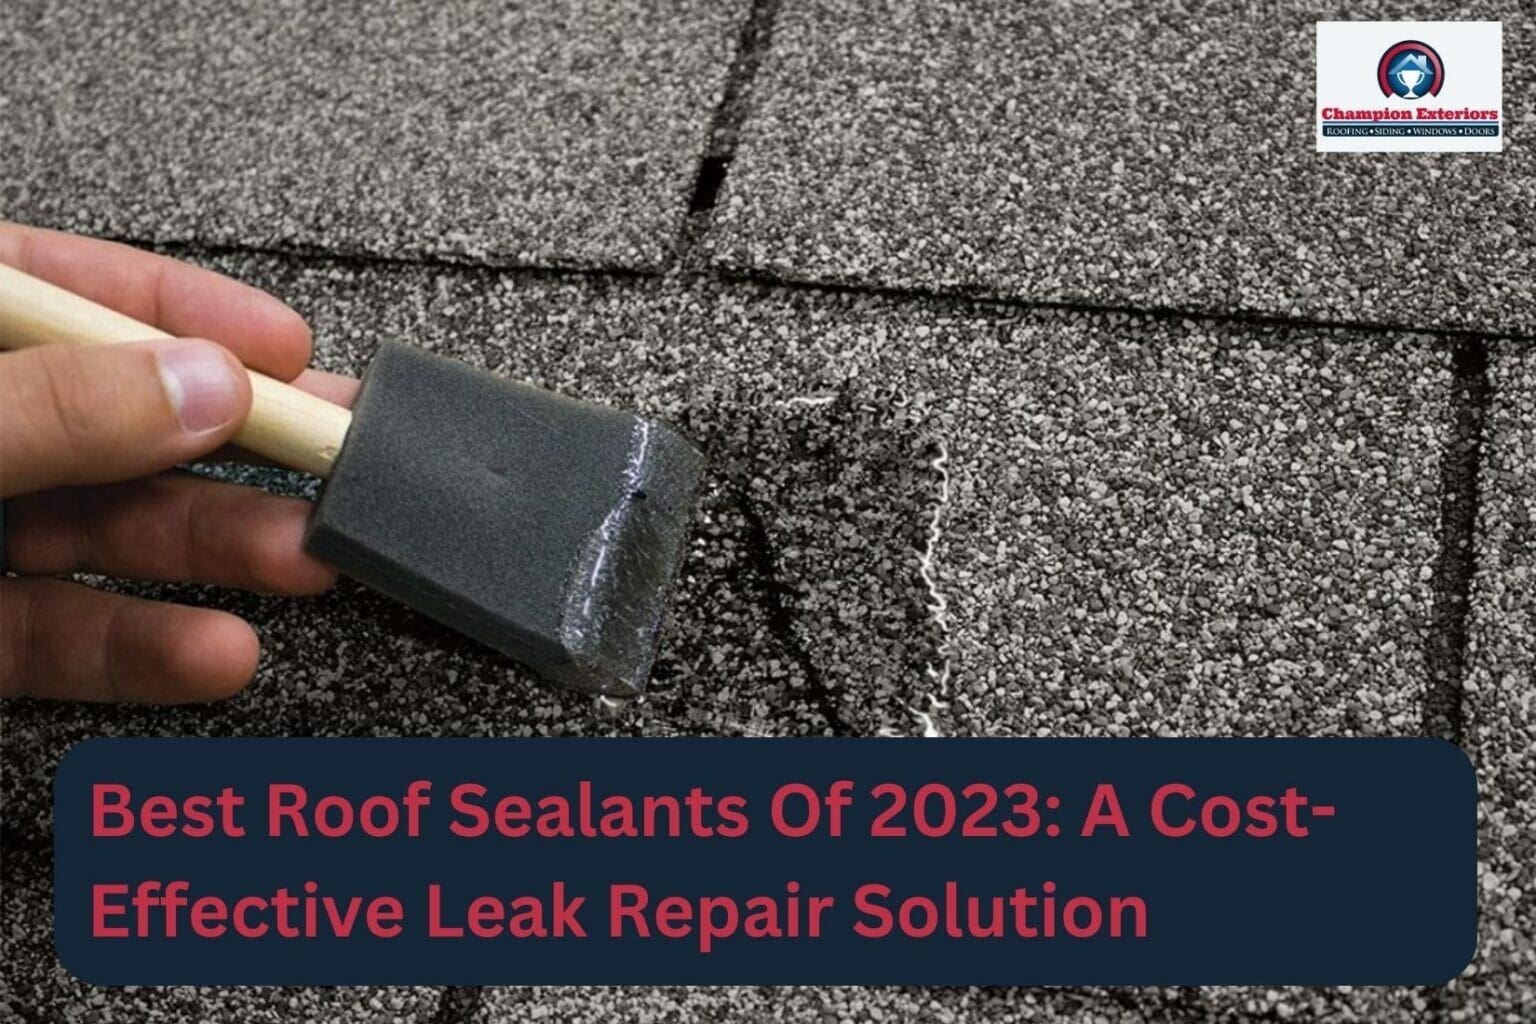 Best Roof Sealants Of 2023: A Cost-Effective Leak Repair Solution